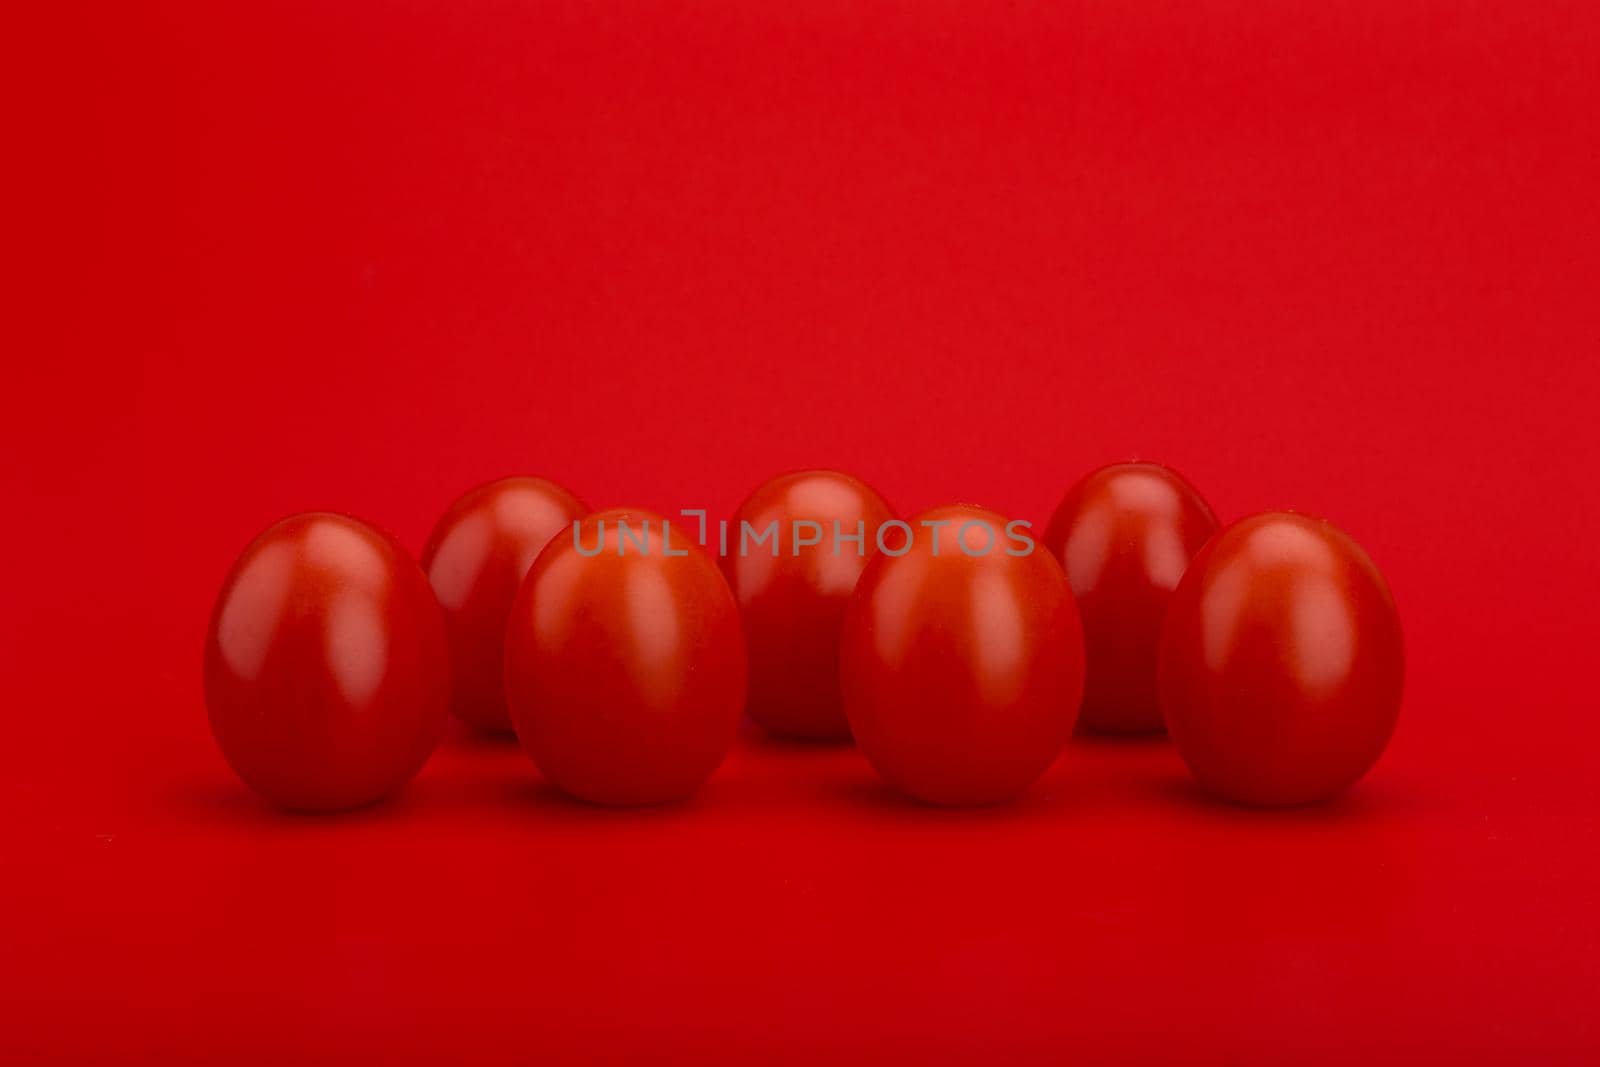 Small cherry tomatoes in a row on red background by Senorina_Irina